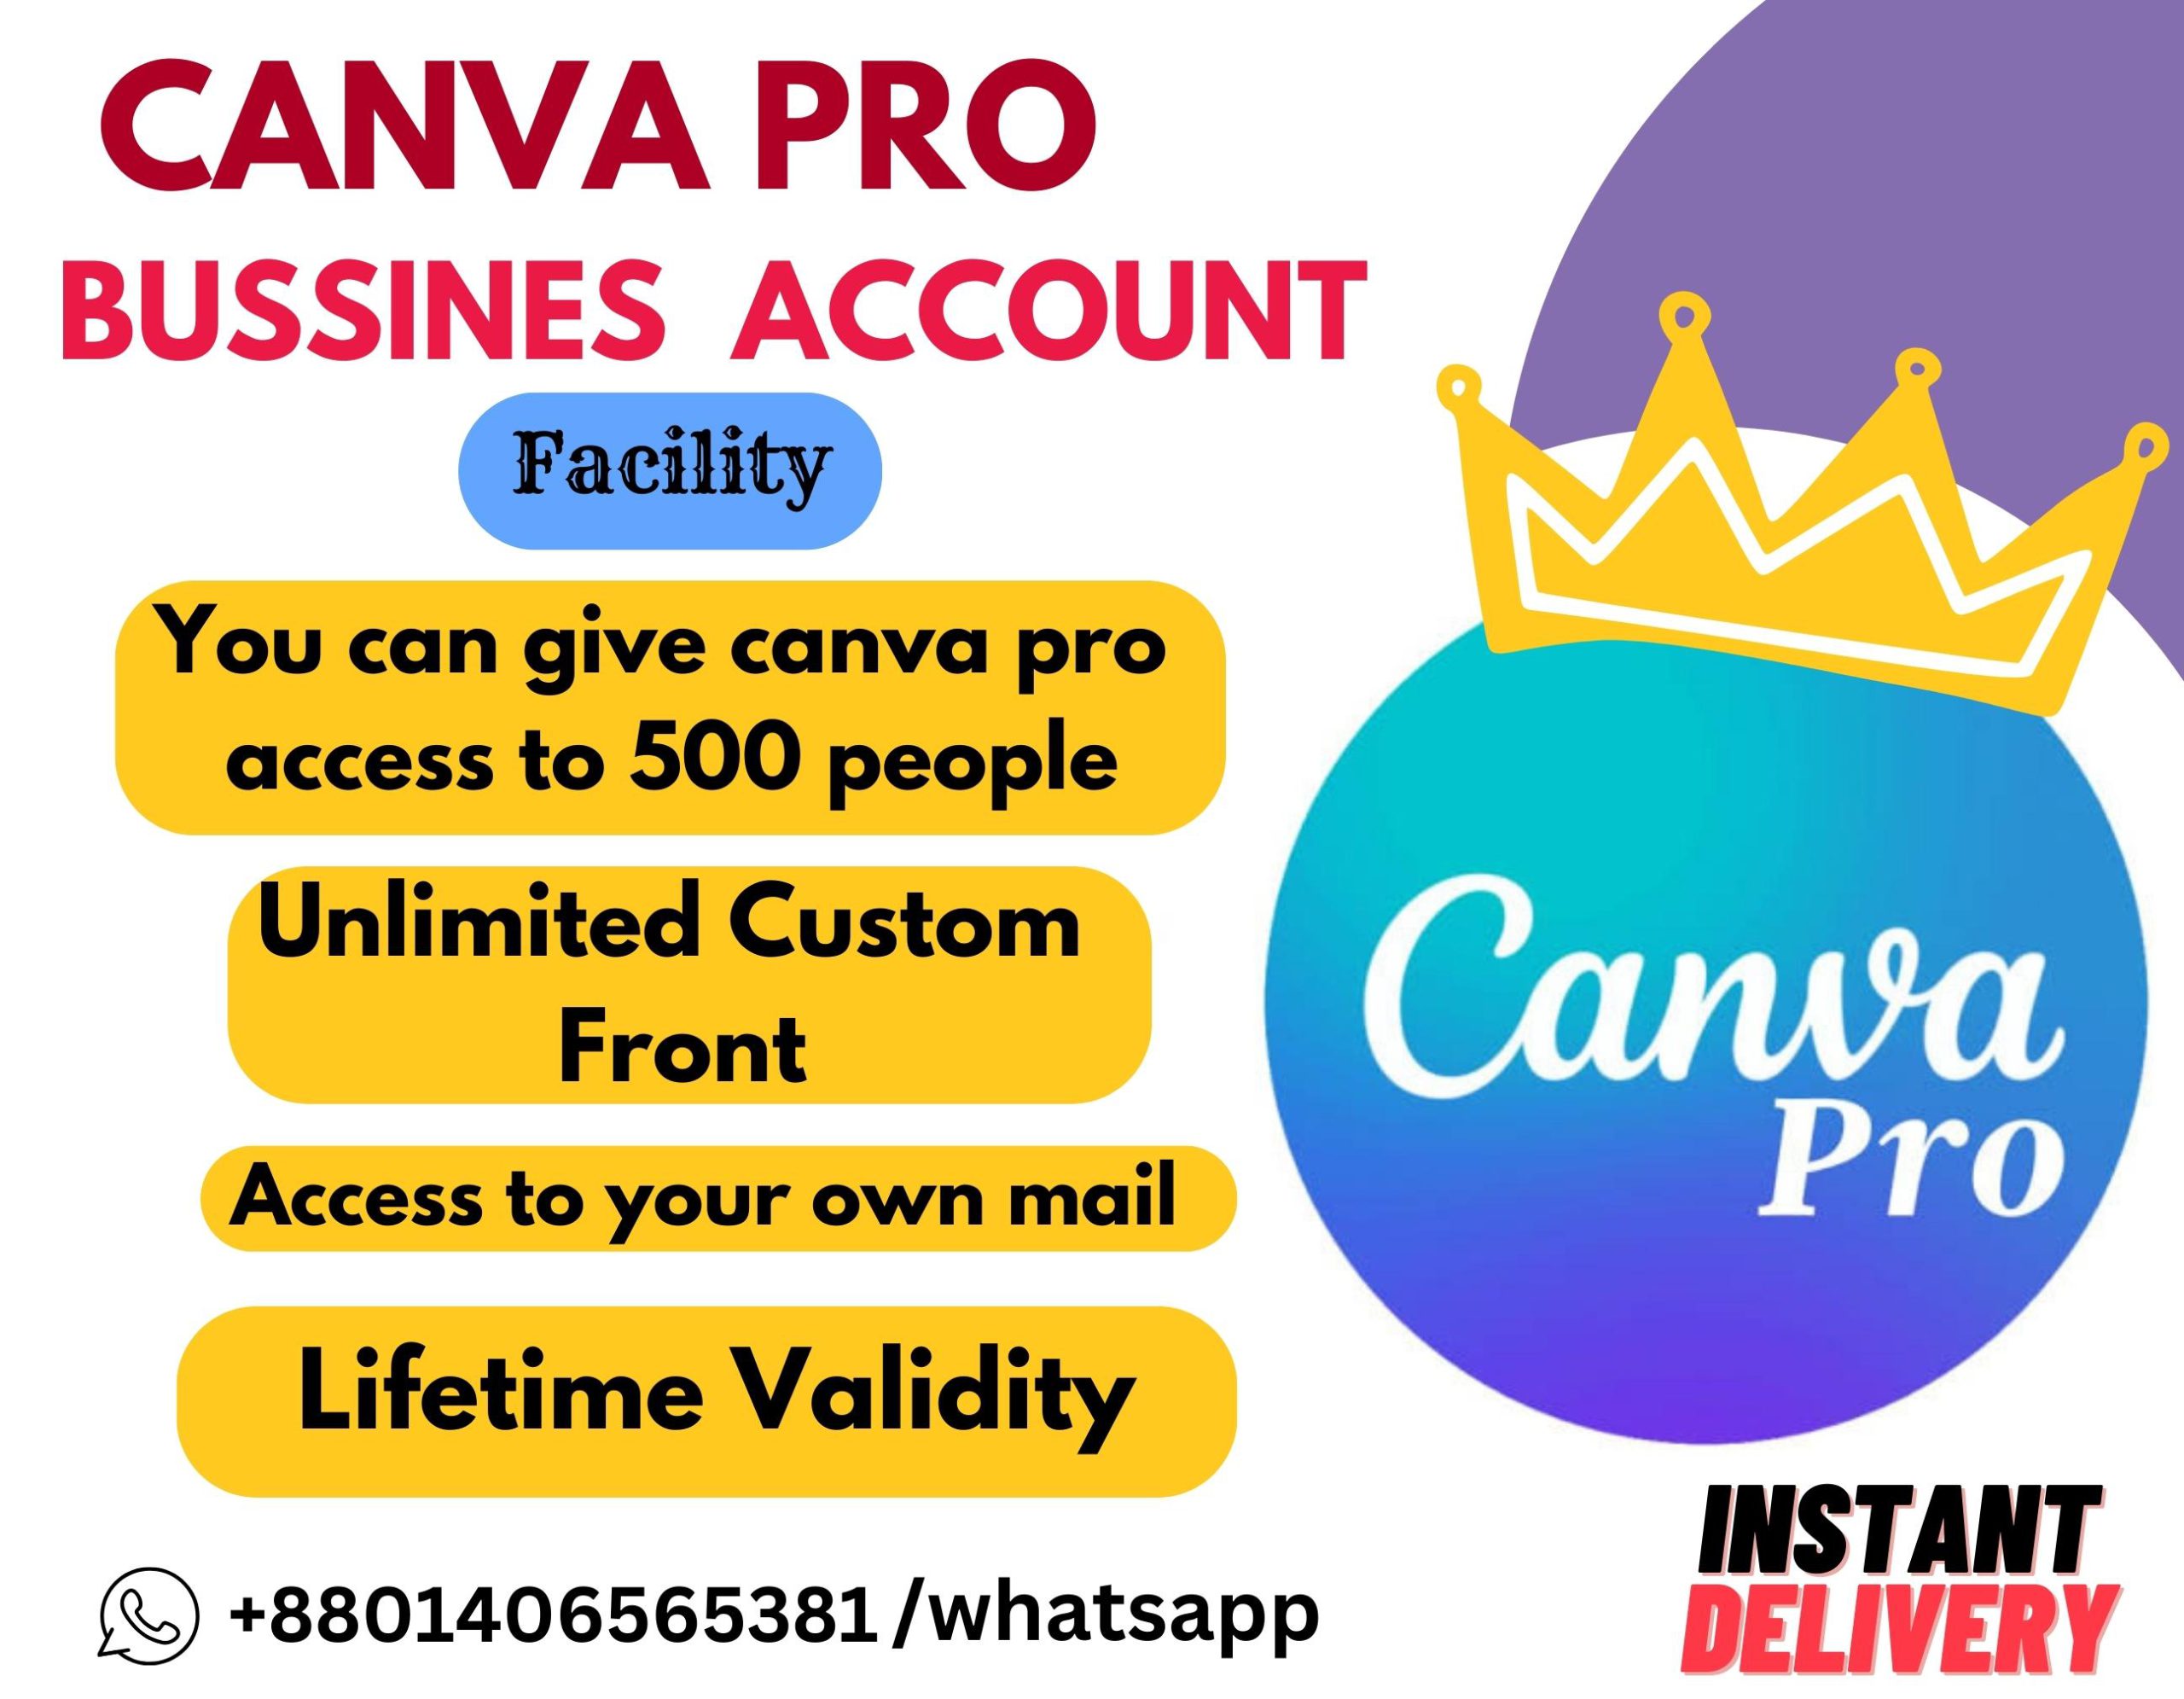 126507Canva Pro Bussines Account